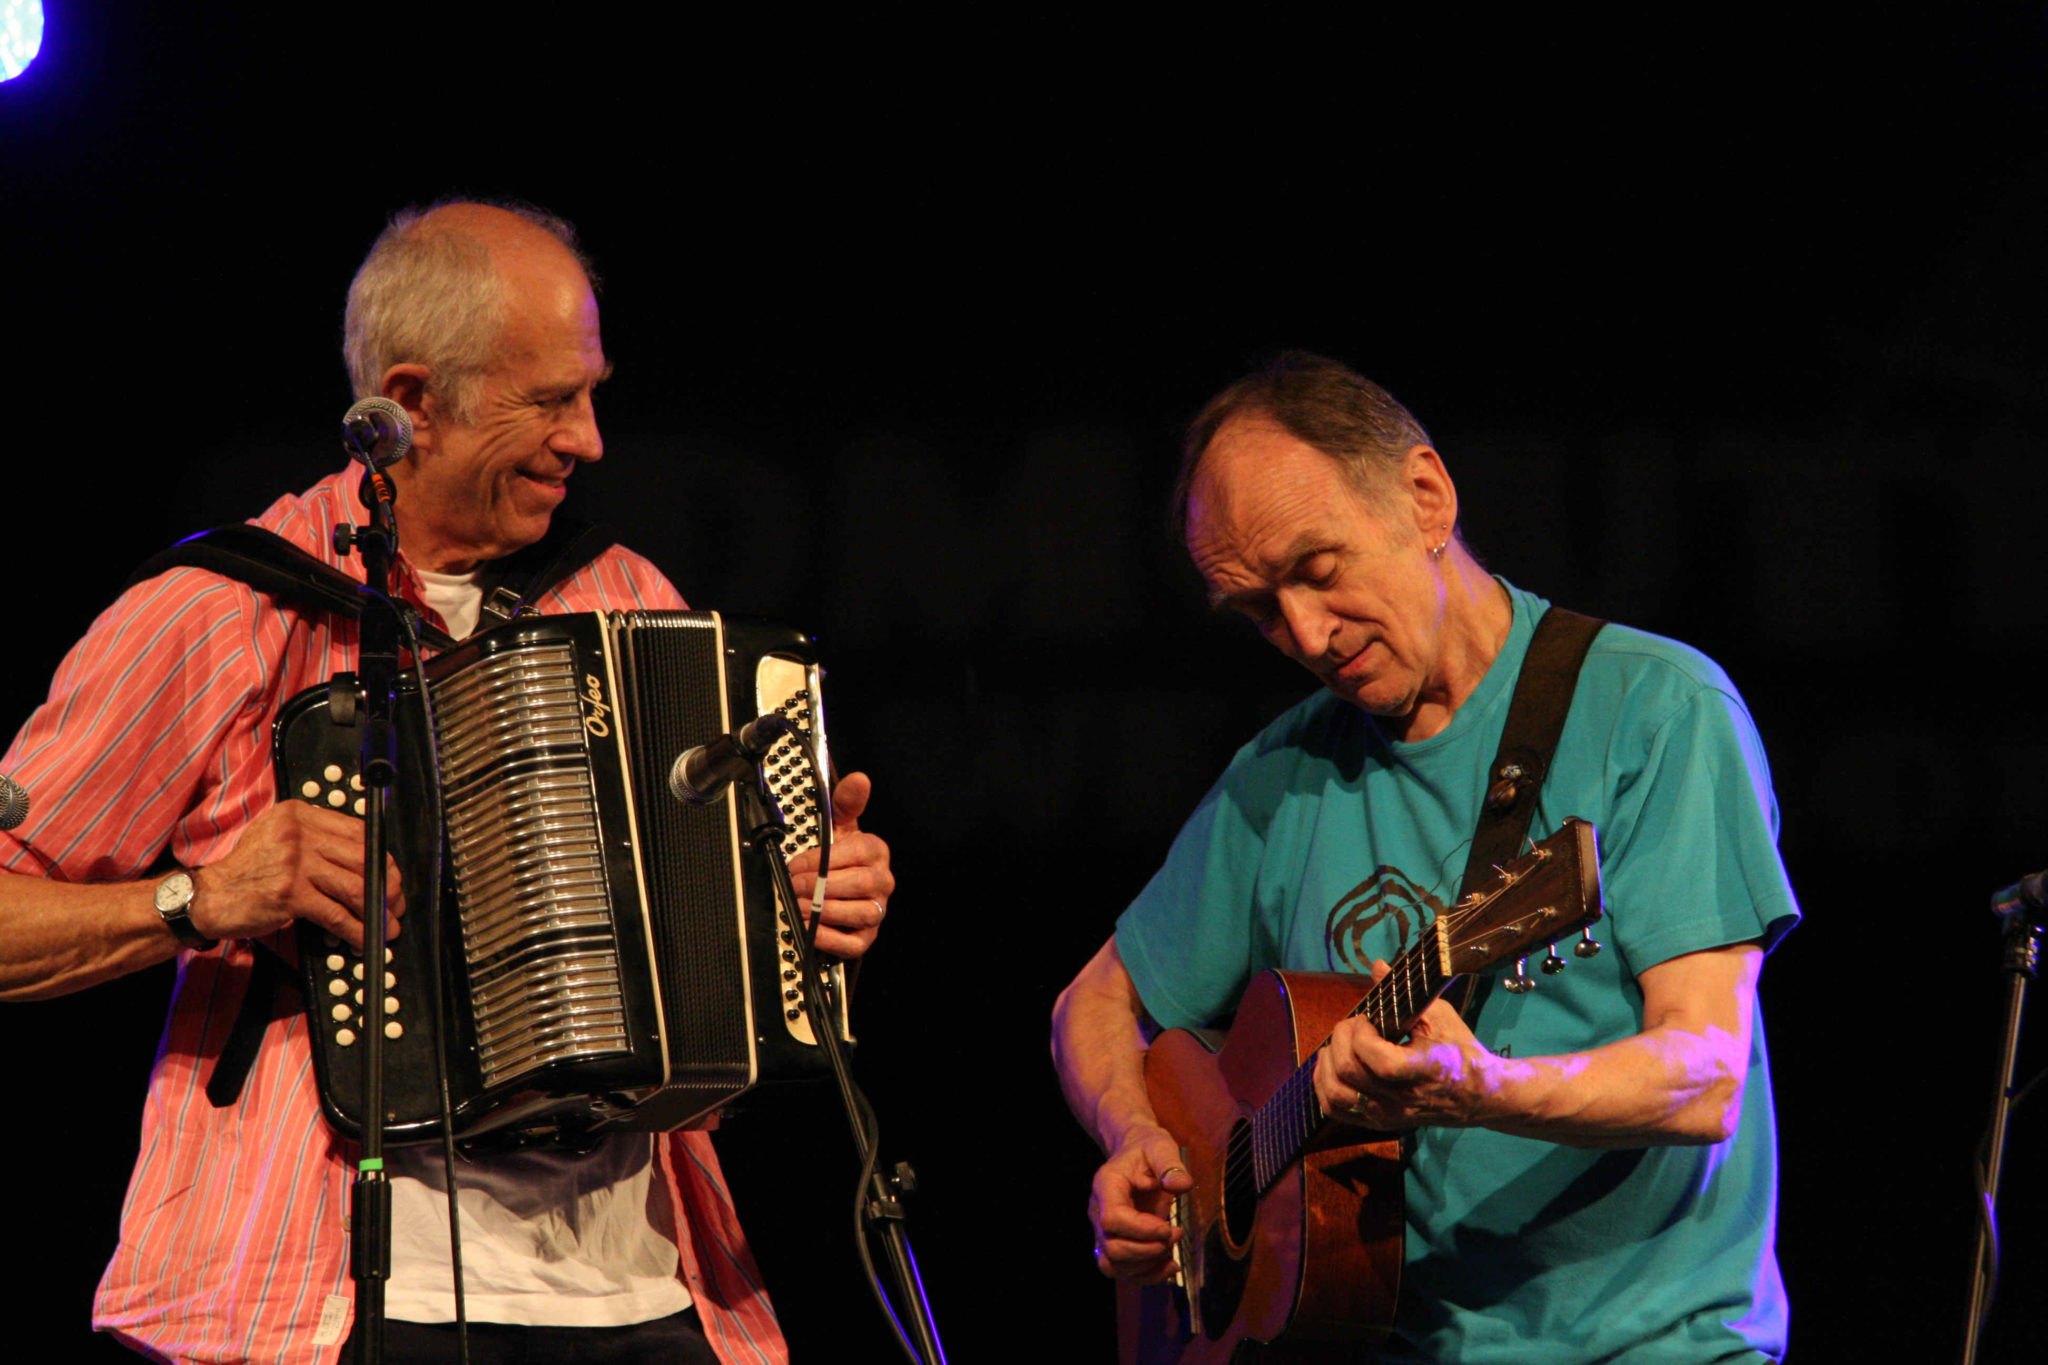 Folk royalty coming to The Brindley